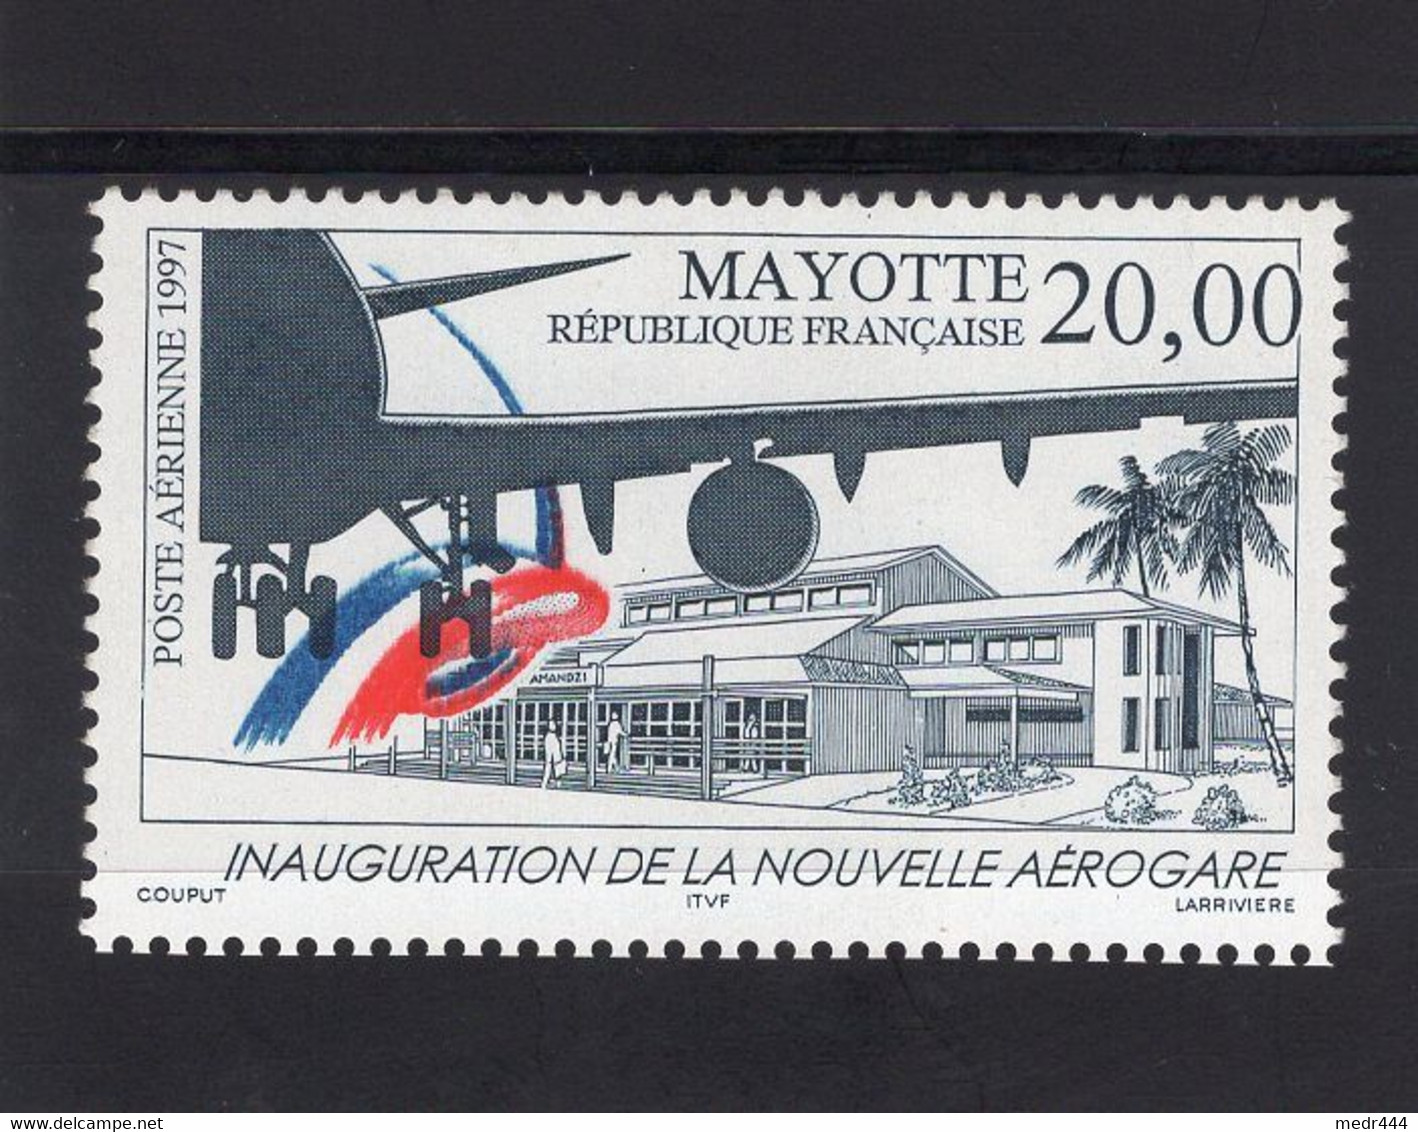 Mayotte 1997 - Airmail - Inauguration Of The New Airport - Stamp - Complete Set - MNH** Excellent Quality - Airmail